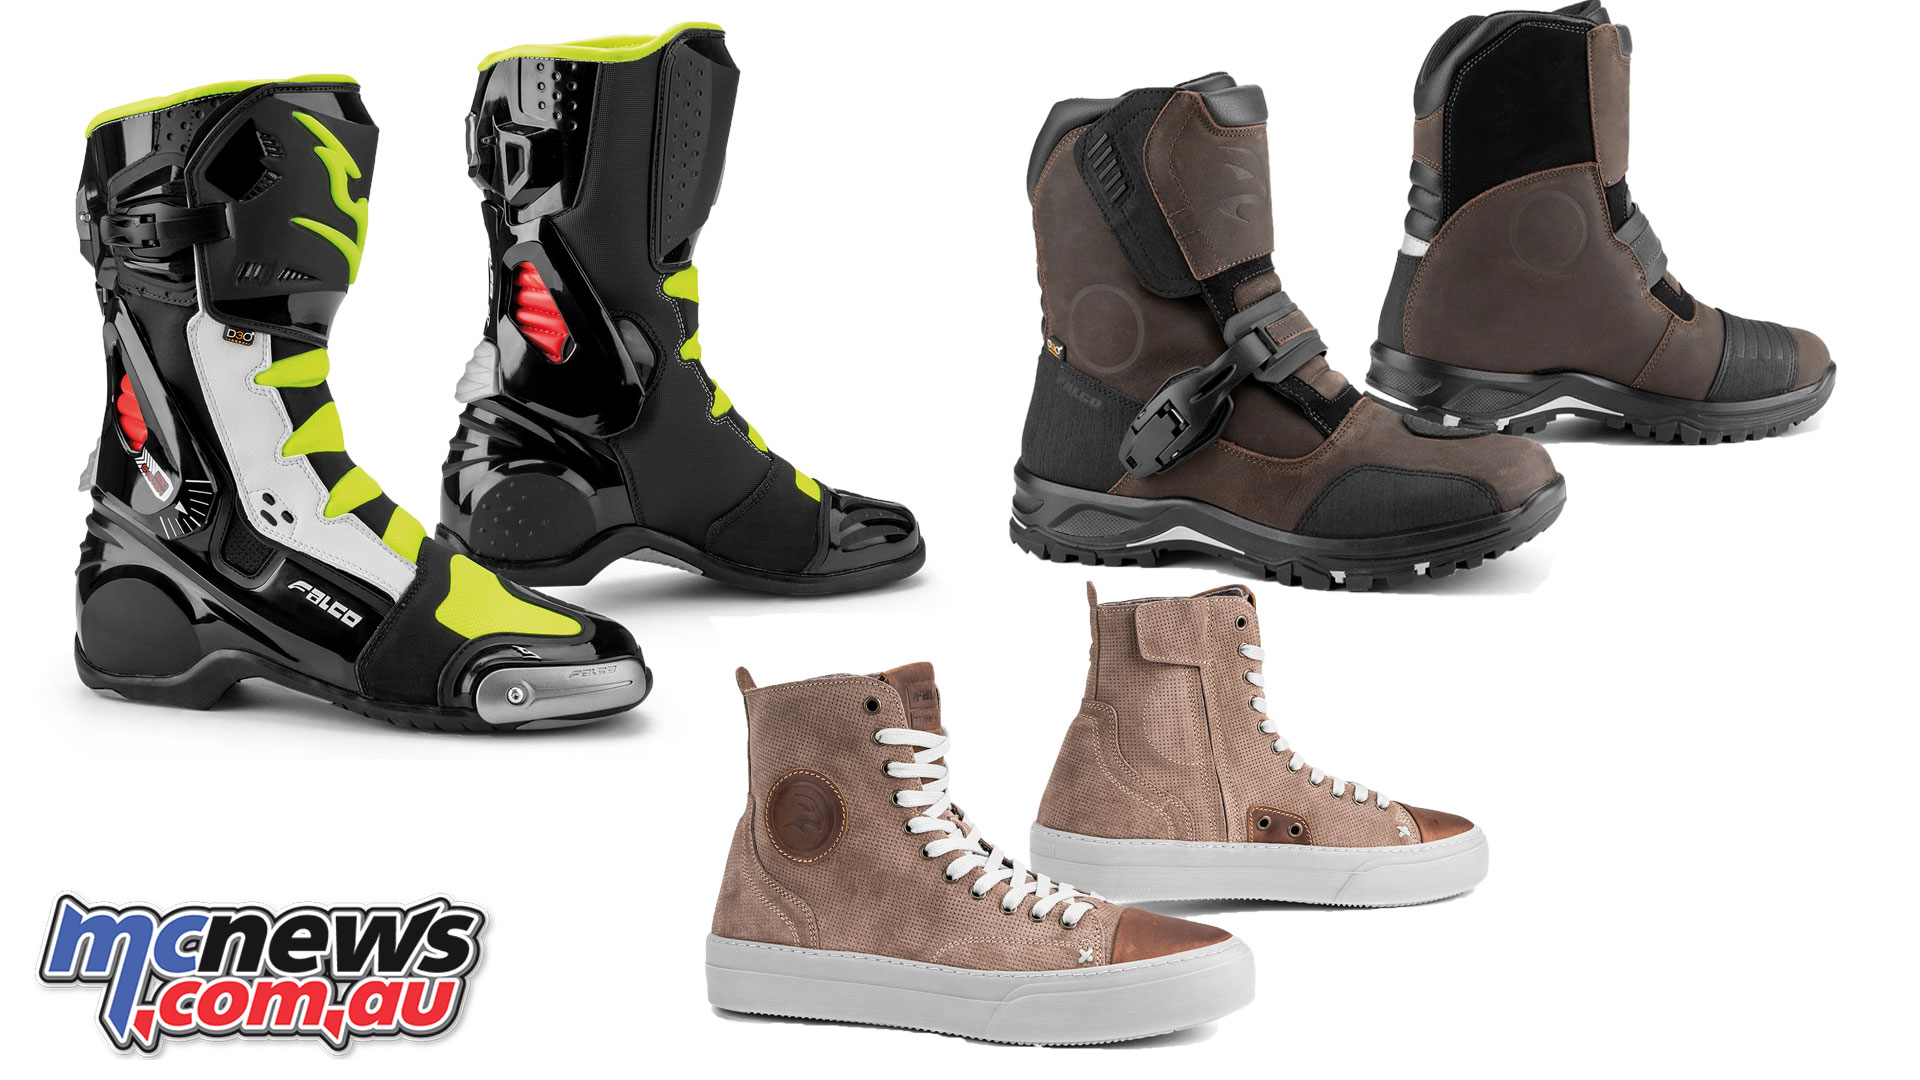 2019 Falco Boots range arrives in 